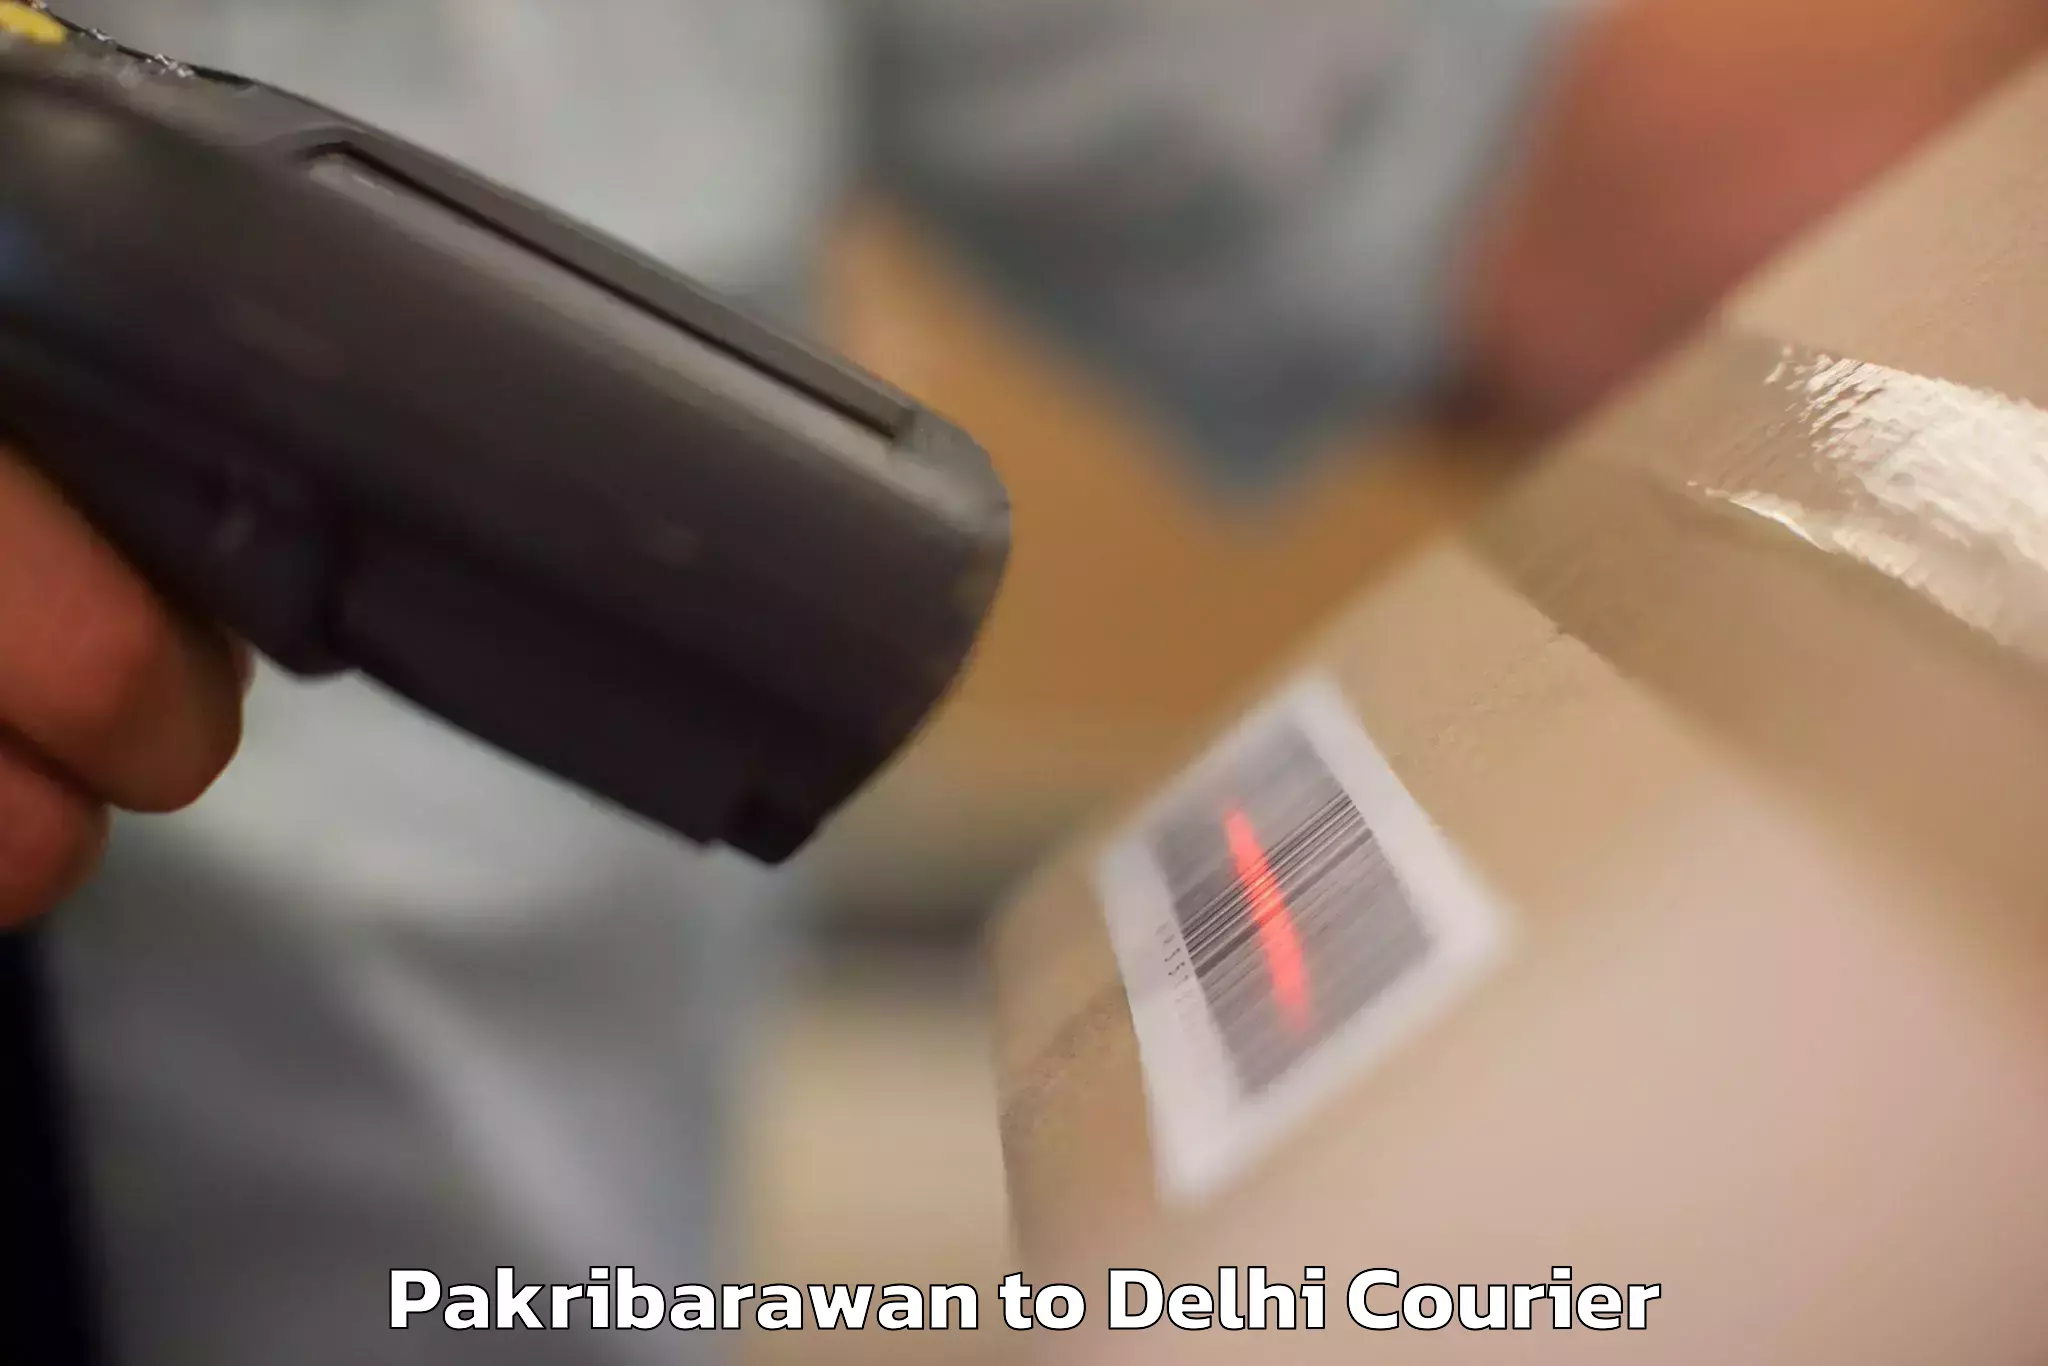 Personal effects shipping in Pakribarawan to University of Delhi